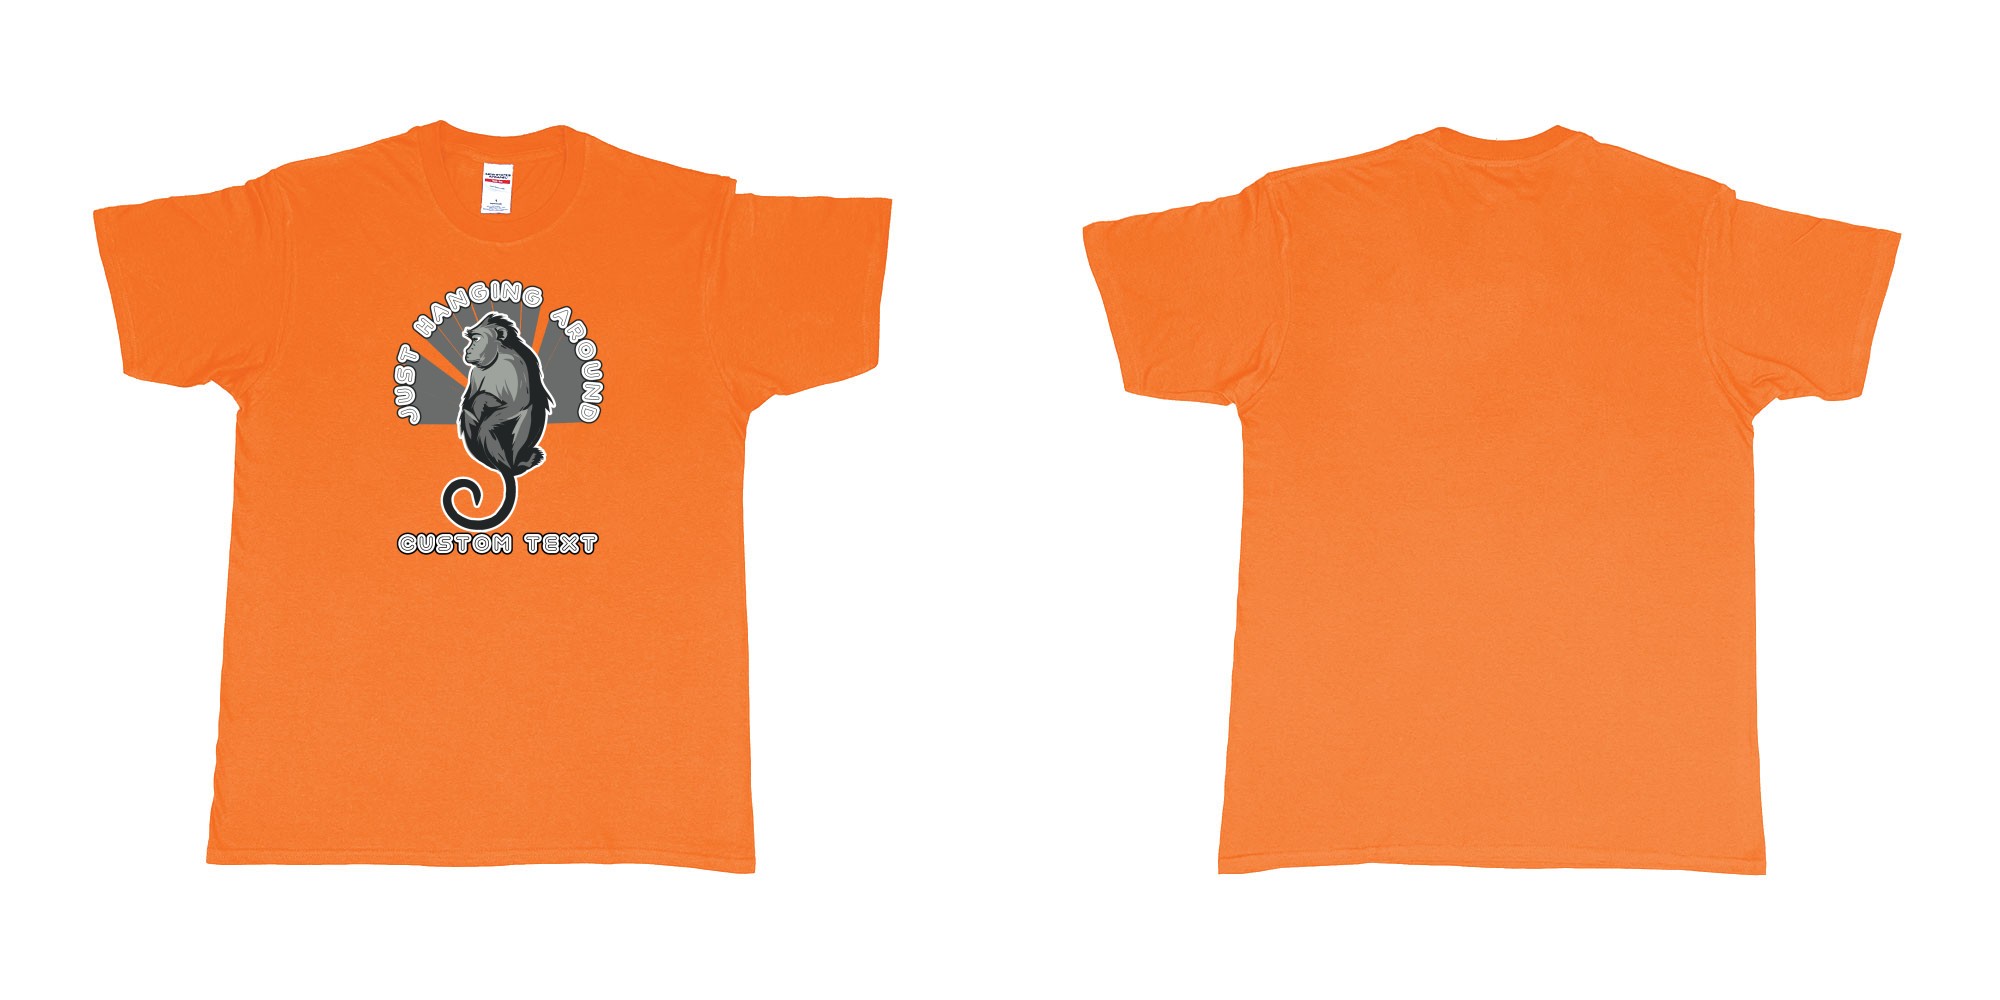 Custom tshirt design just hanging around monkey in fabric color orange choice your own text made in Bali by The Pirate Way